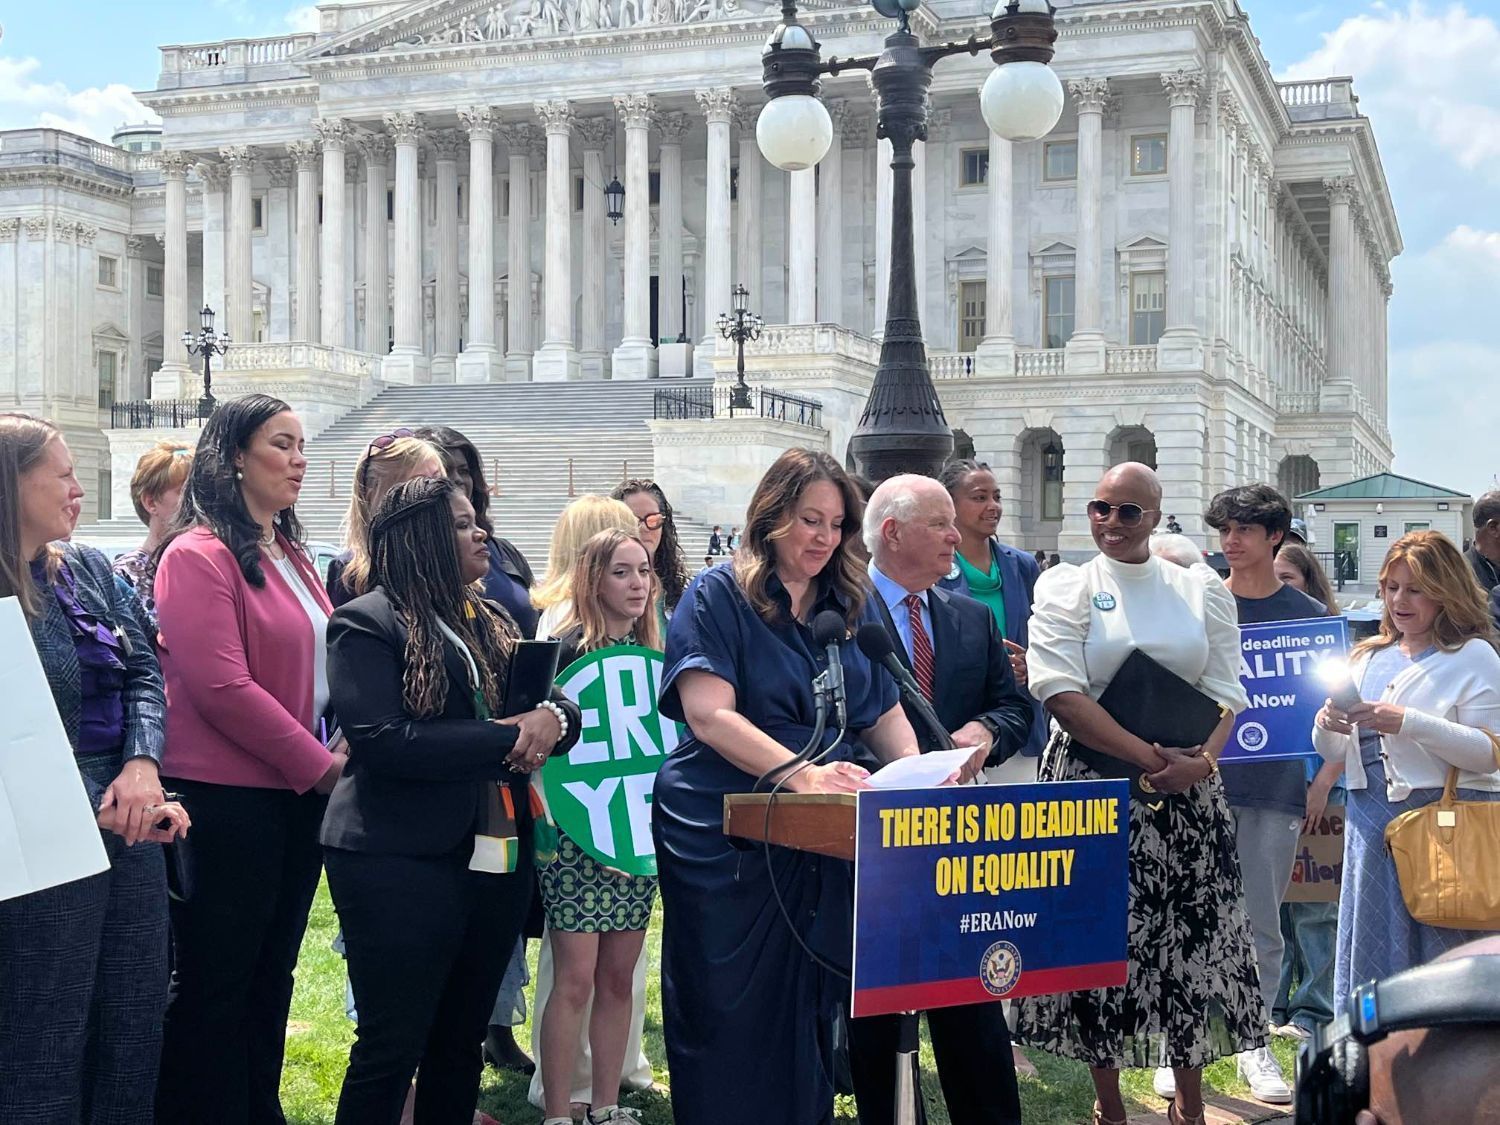 LWVUS CEO Virginia Kase Solomon in front of the US Capitol Building for a press conference on the ERA